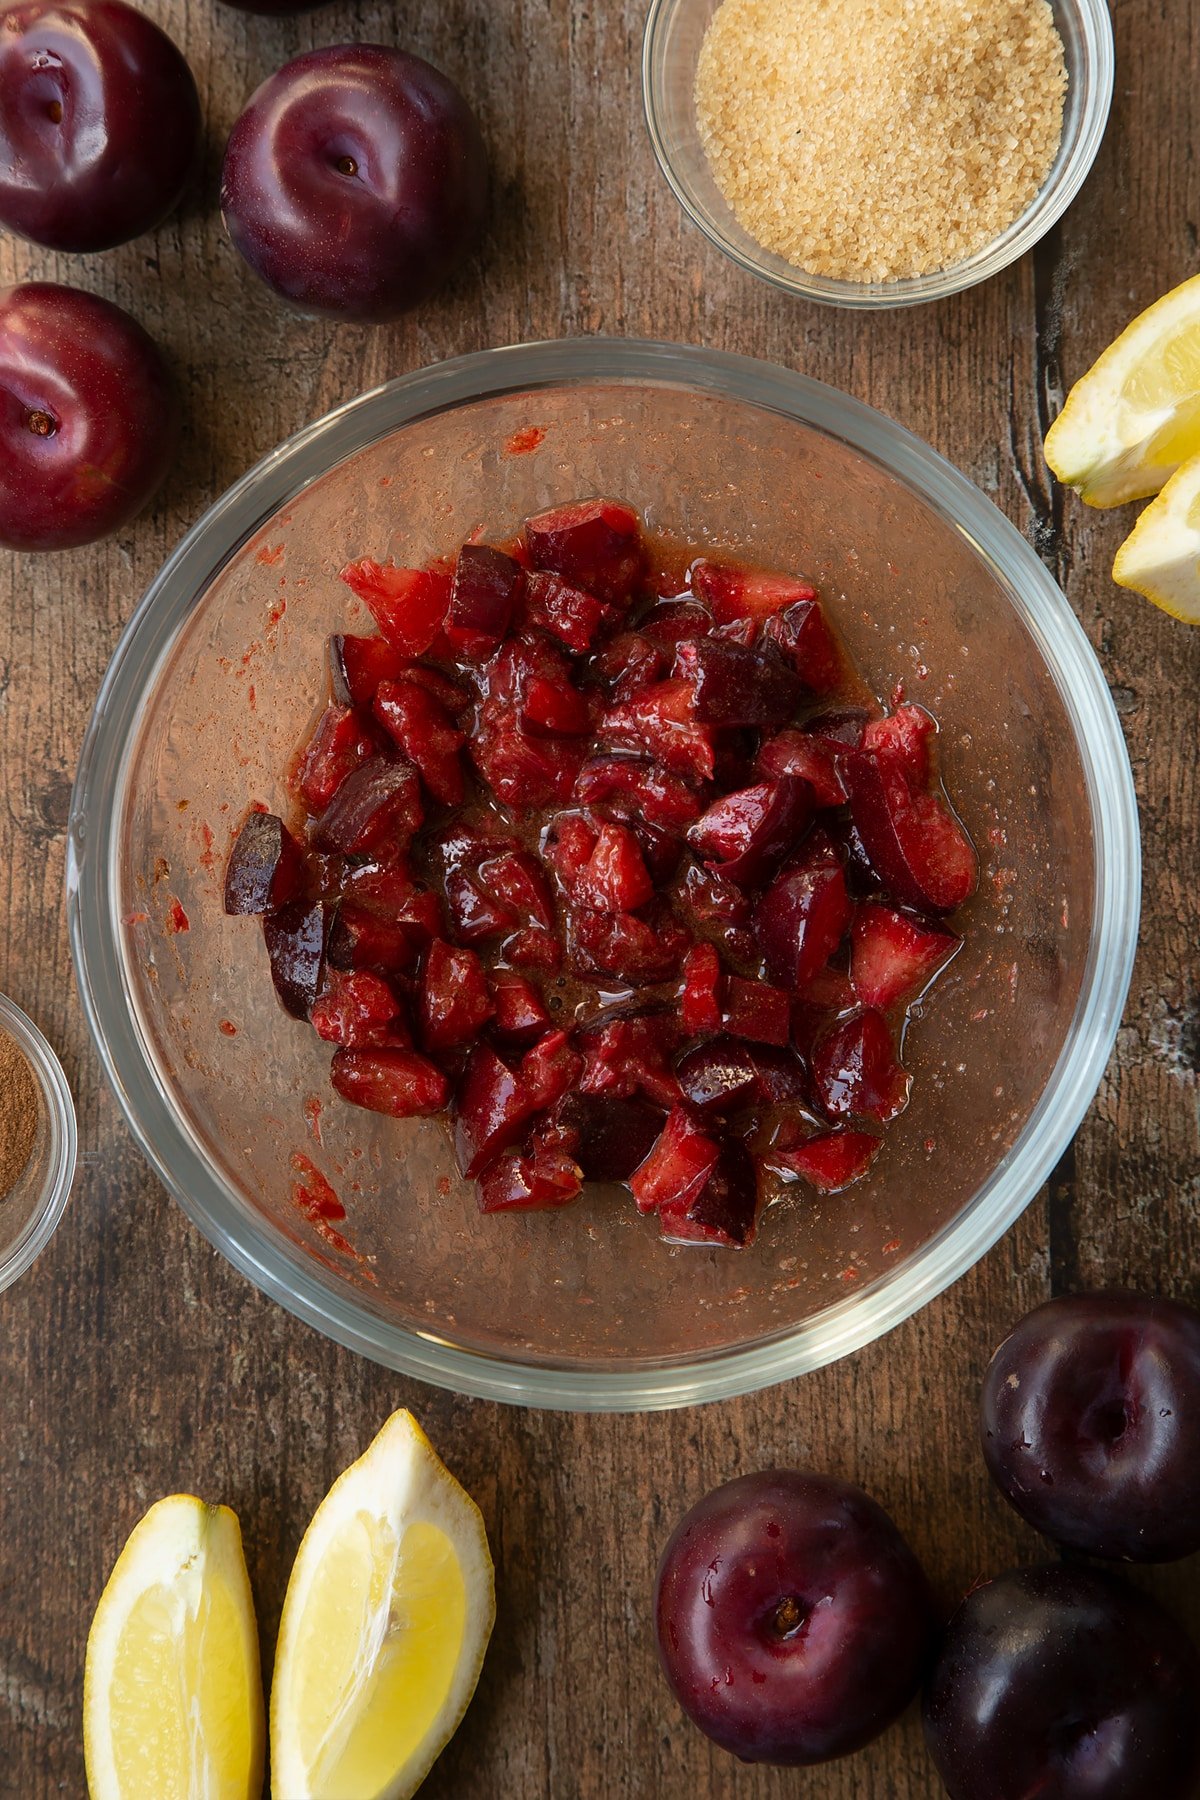 Sugar, lemon juice, cinnamon and plums mixed together in a glass mixing bowl. Ingredients to make a plum pastry recipe surround the bowl.